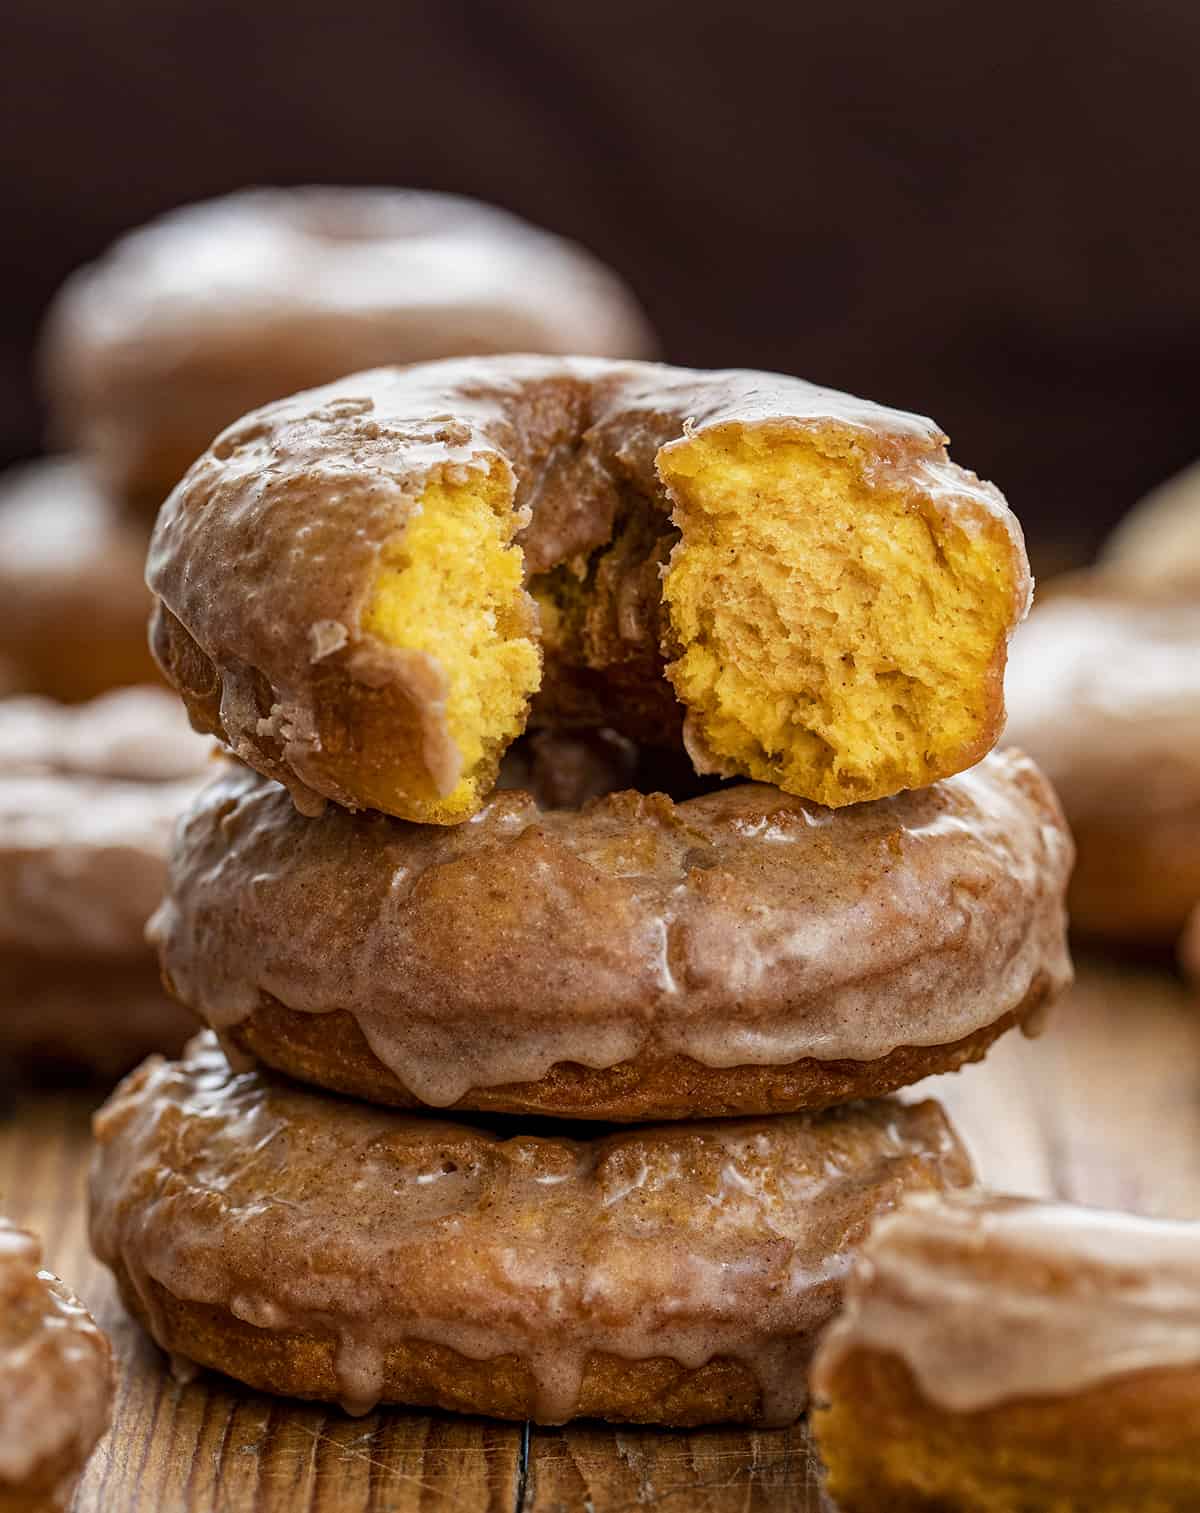 Stack of Glazed Pumpkin Donuts with Top Donut Halved and Showing Texture inside. Breakfast, Donuts, Donut Recipes, Pumpkin Donut Recipes, How to Fry Donuts, Pumpkin Donuts in the Air Fryer, How to Bake Donuts, Baked Pumpkin Donuts, Brunch Ideas, Fall Baking, Best Pumpkin Donuts, i am baker, iambaker